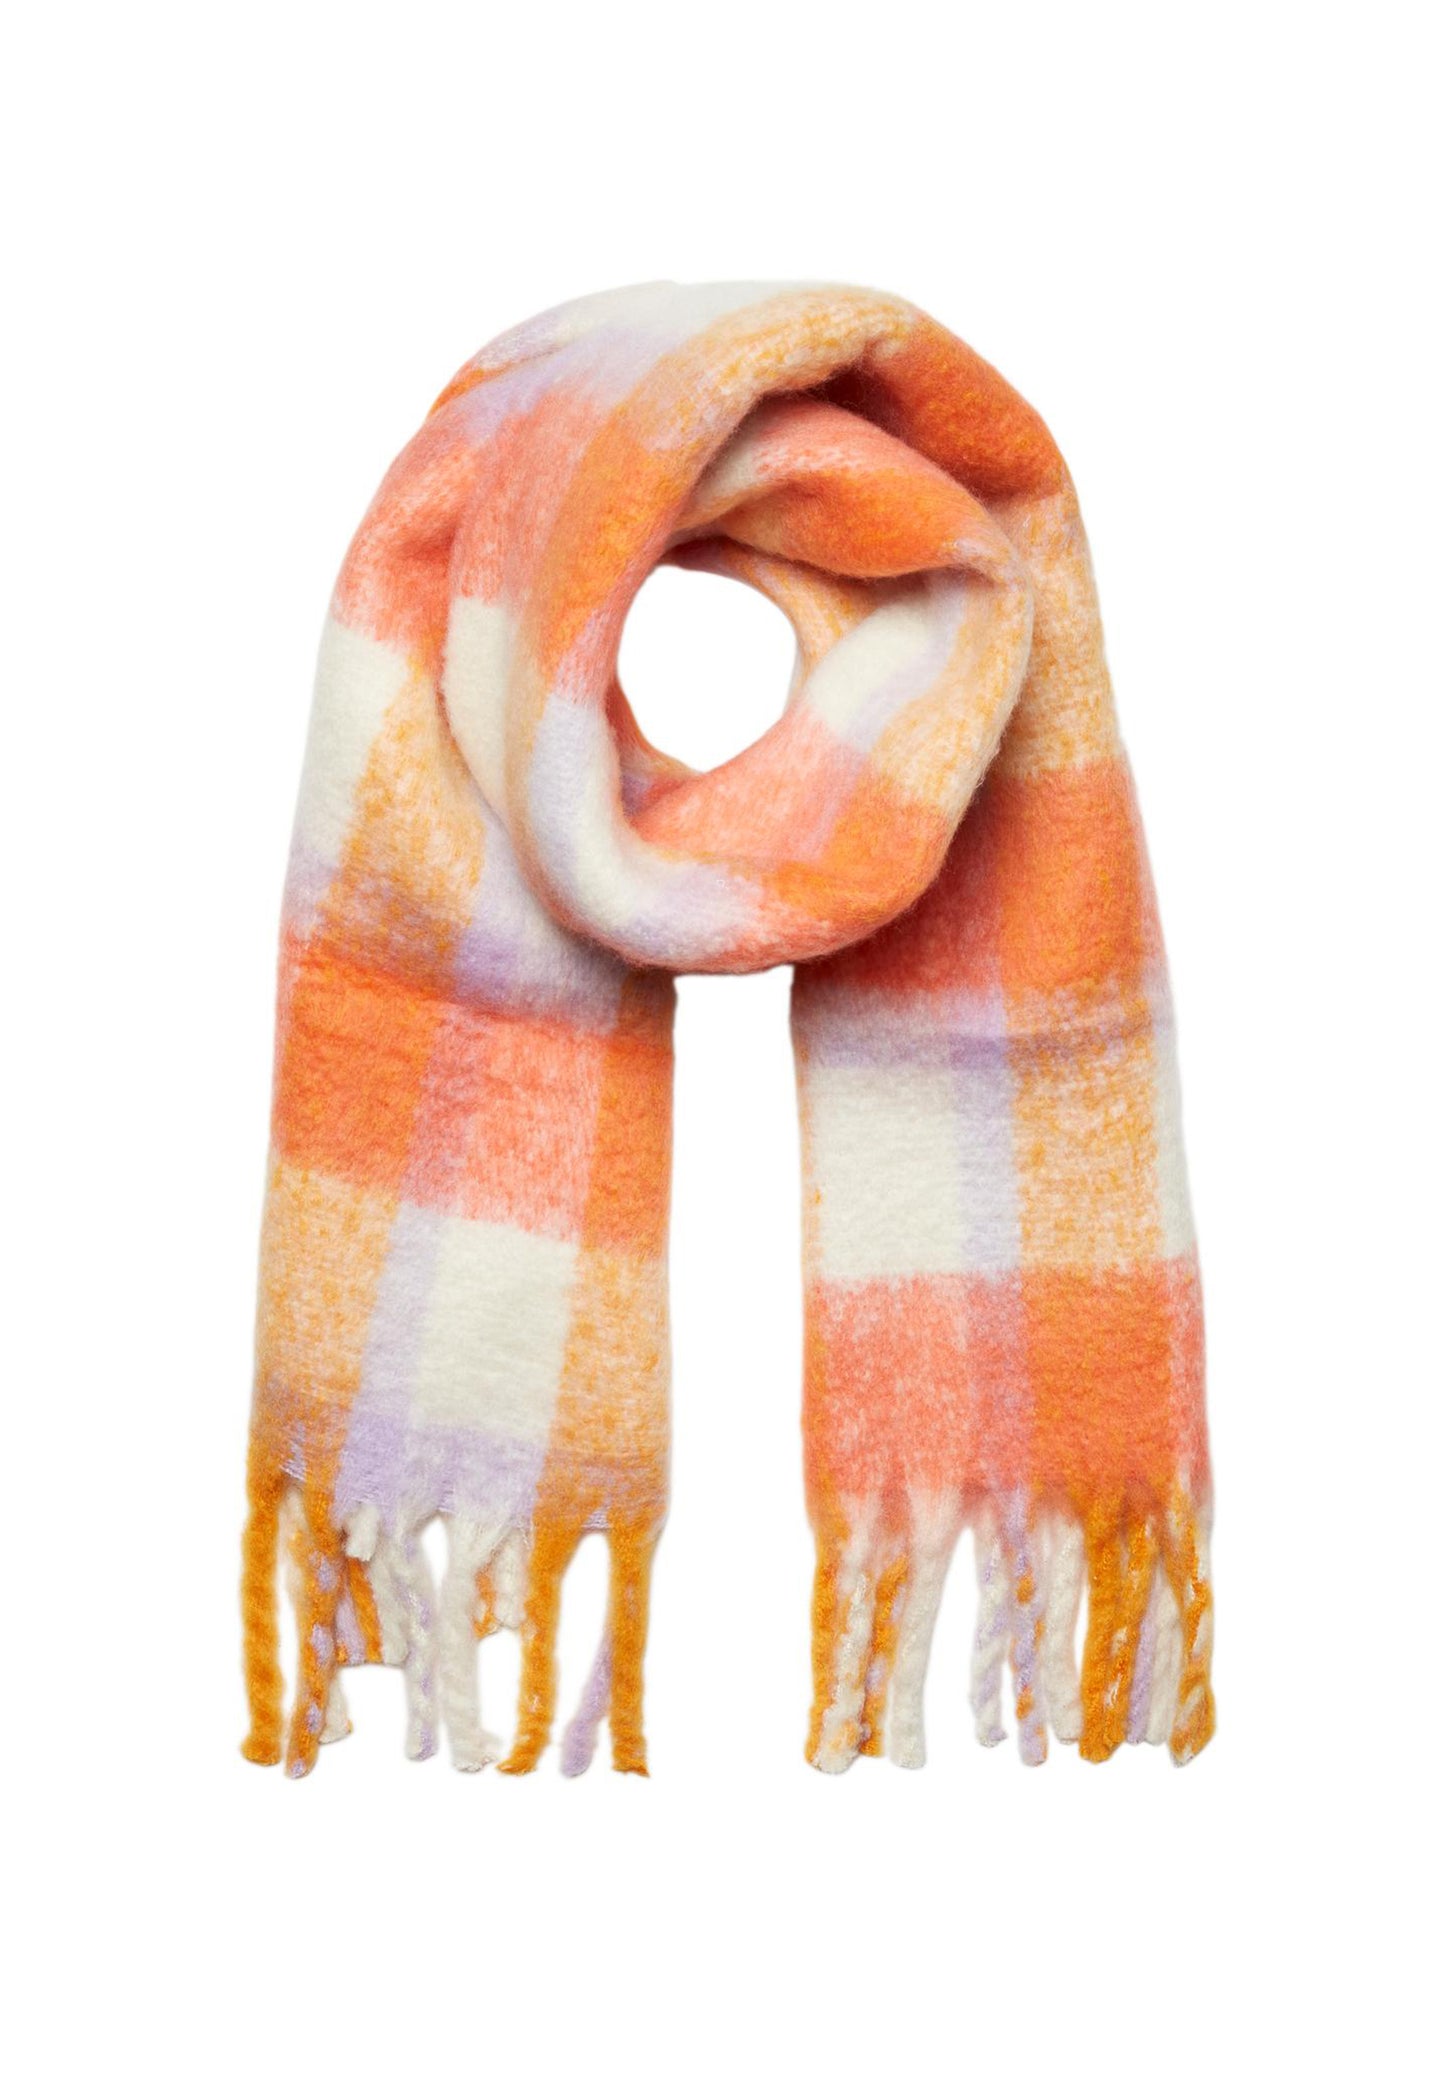 VERO MODA Oversized Brushed Check Scarf with Tassels in Orange & Lilac - One Nation Clothing